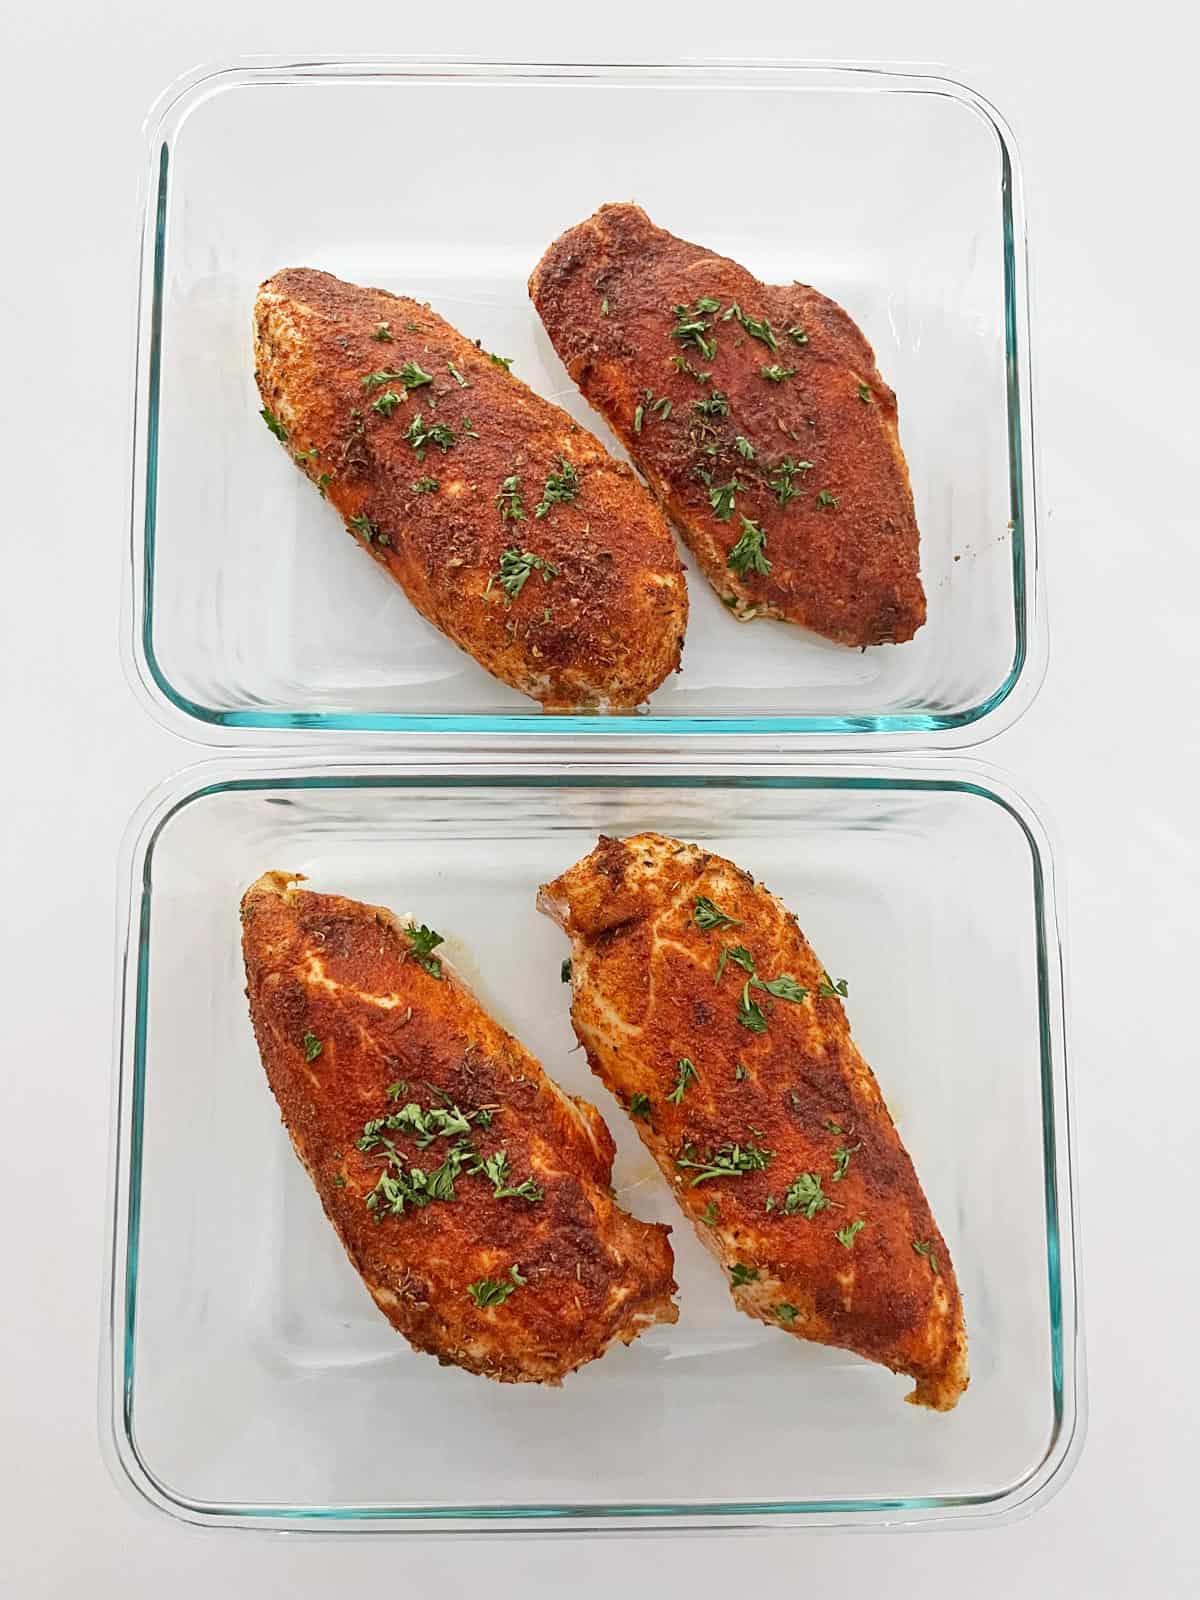 Storing Cajun chicken leftovers - the image shows two glass containers with two chicken pieces in each. 